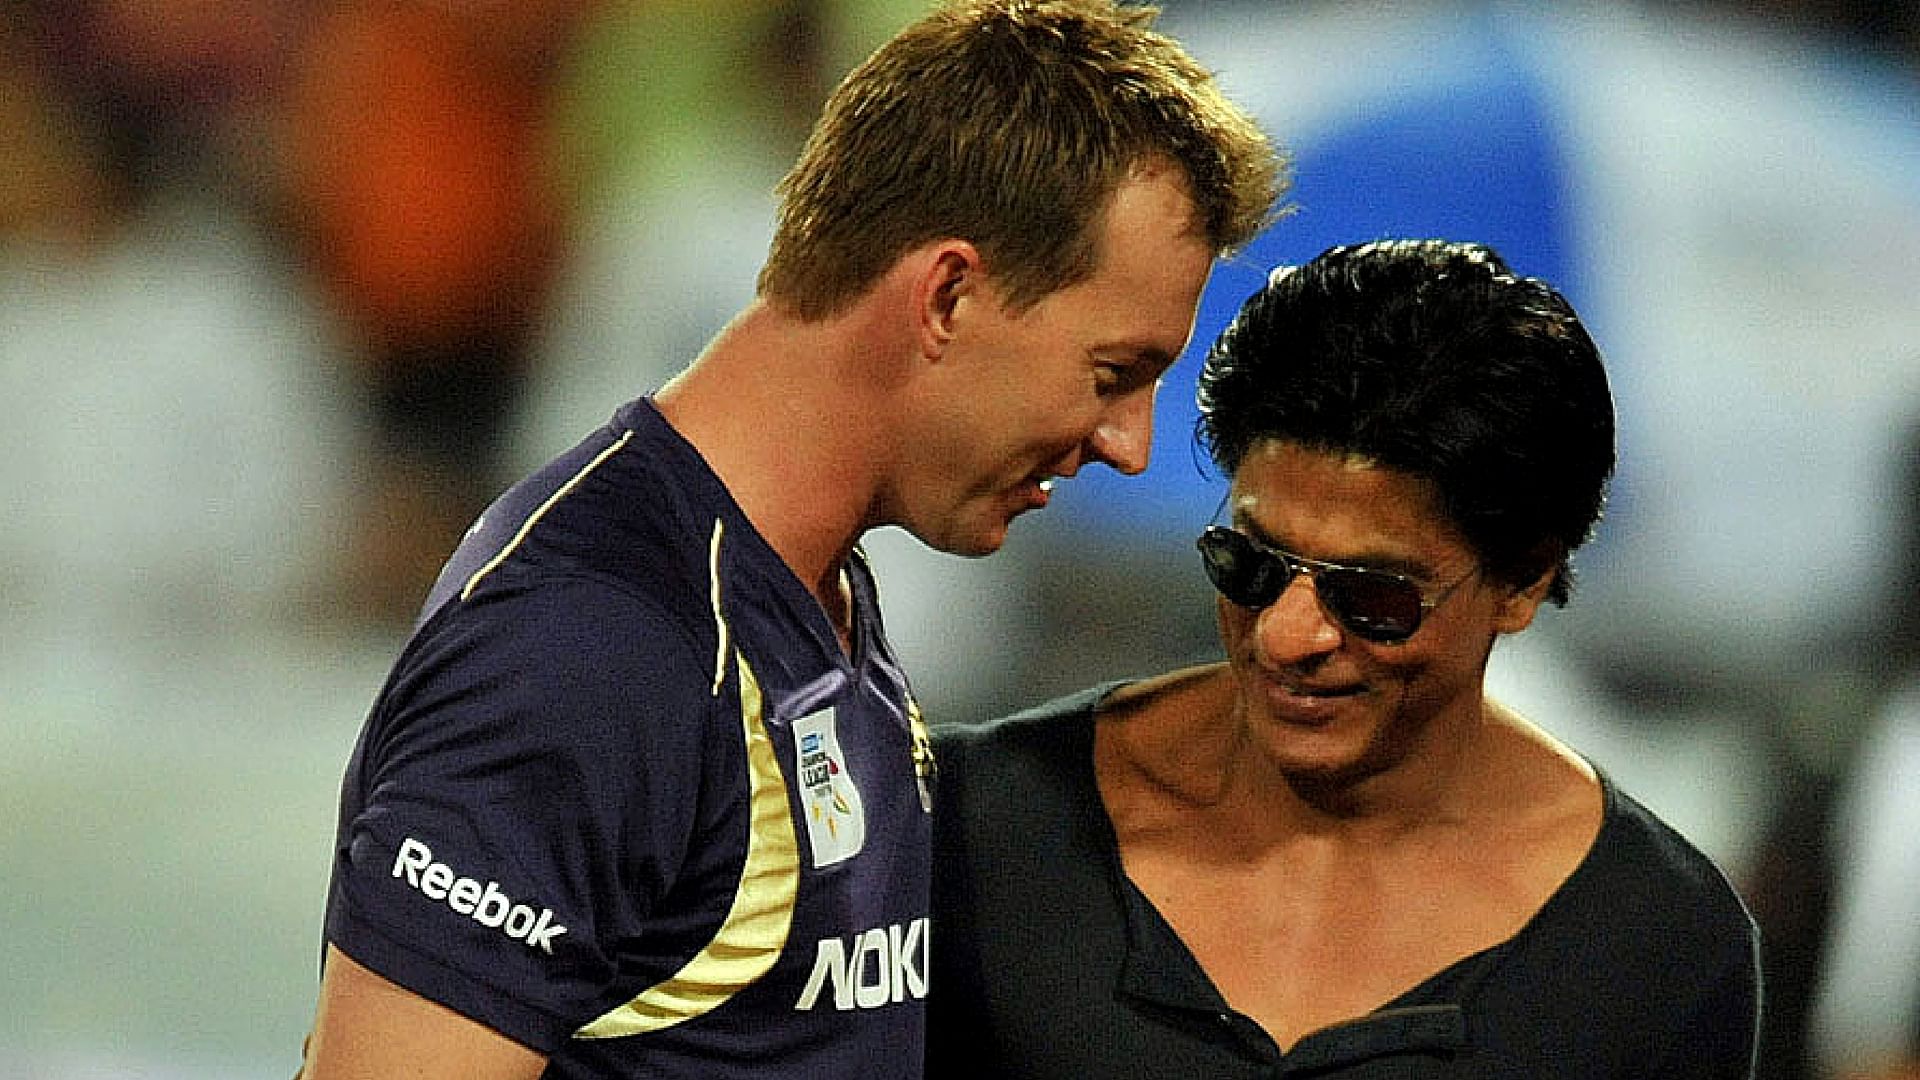 

Brett Lee with Knight Riders Owner Shah Rukh Khan at a match. (Photo courtesy:Twitter/ <a href="https://twitter.com/search?f=images&amp;vertical=default&amp;q=brett%20lee%20srk&amp;src=typd">@WattoFan4ever</a>)